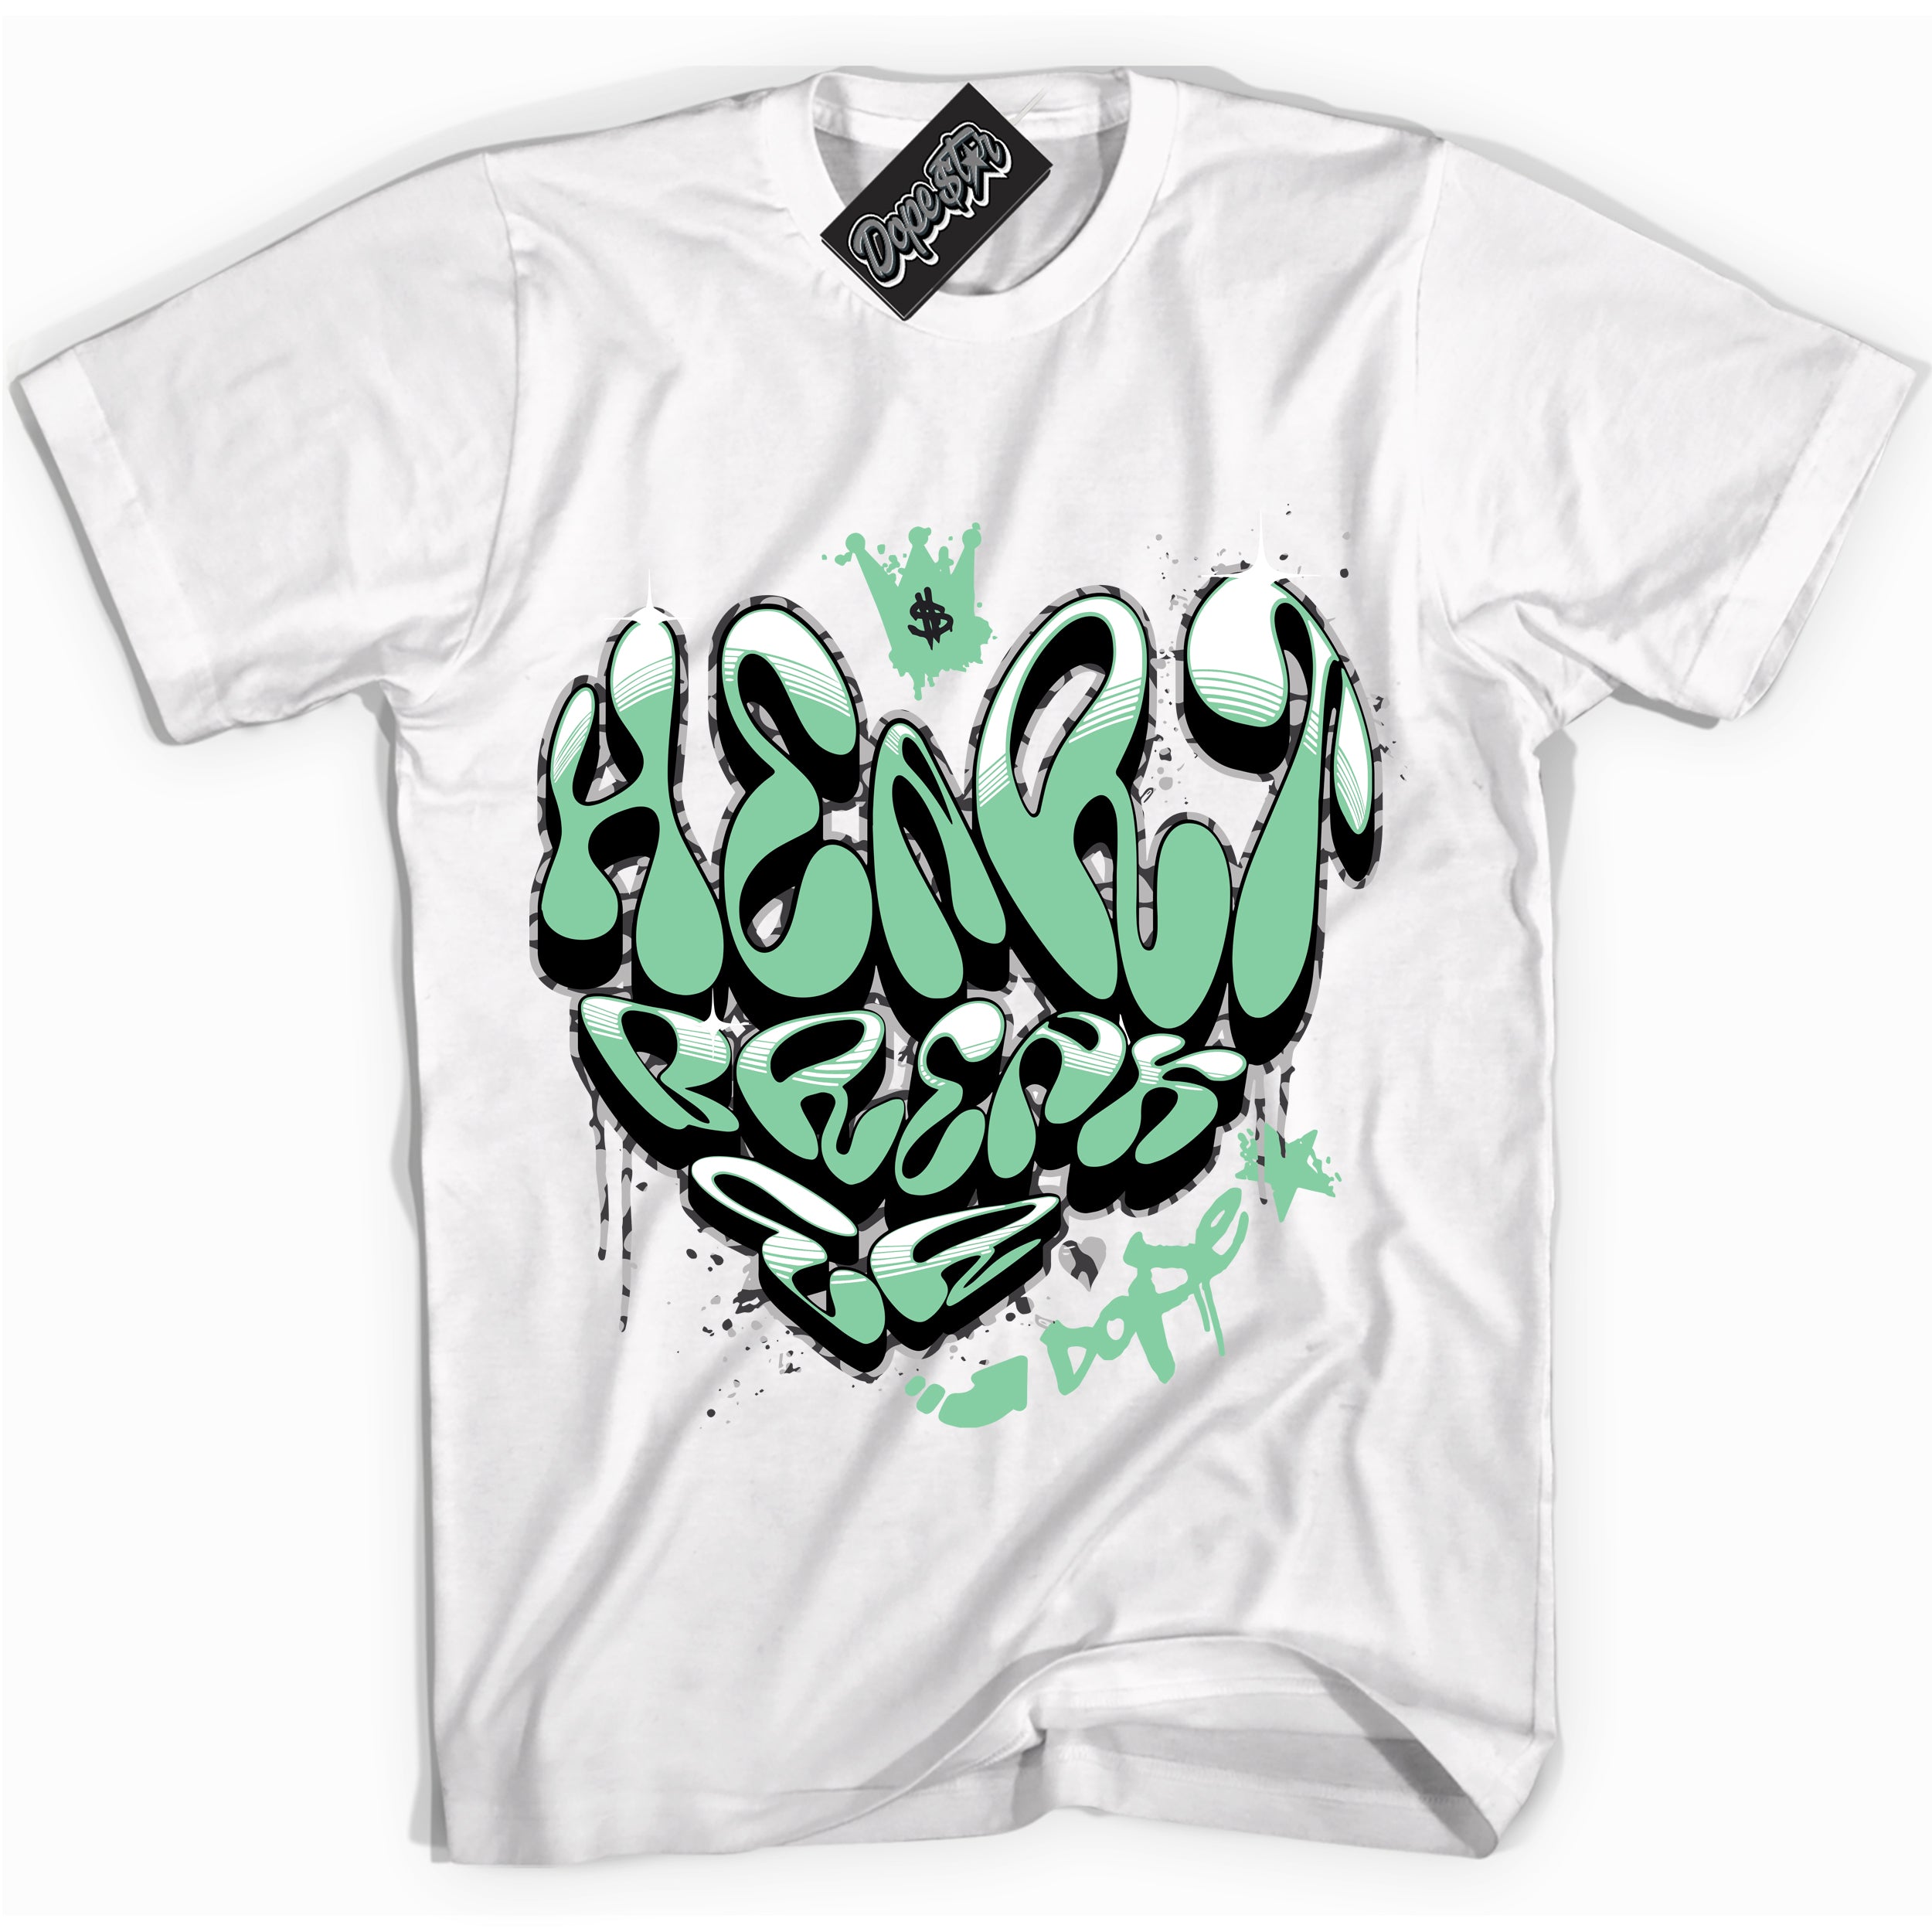 Cool White graphic tee with “ Heartbreaker Graffiti ” design, that perfectly matches Green Glow 3s sneakers 